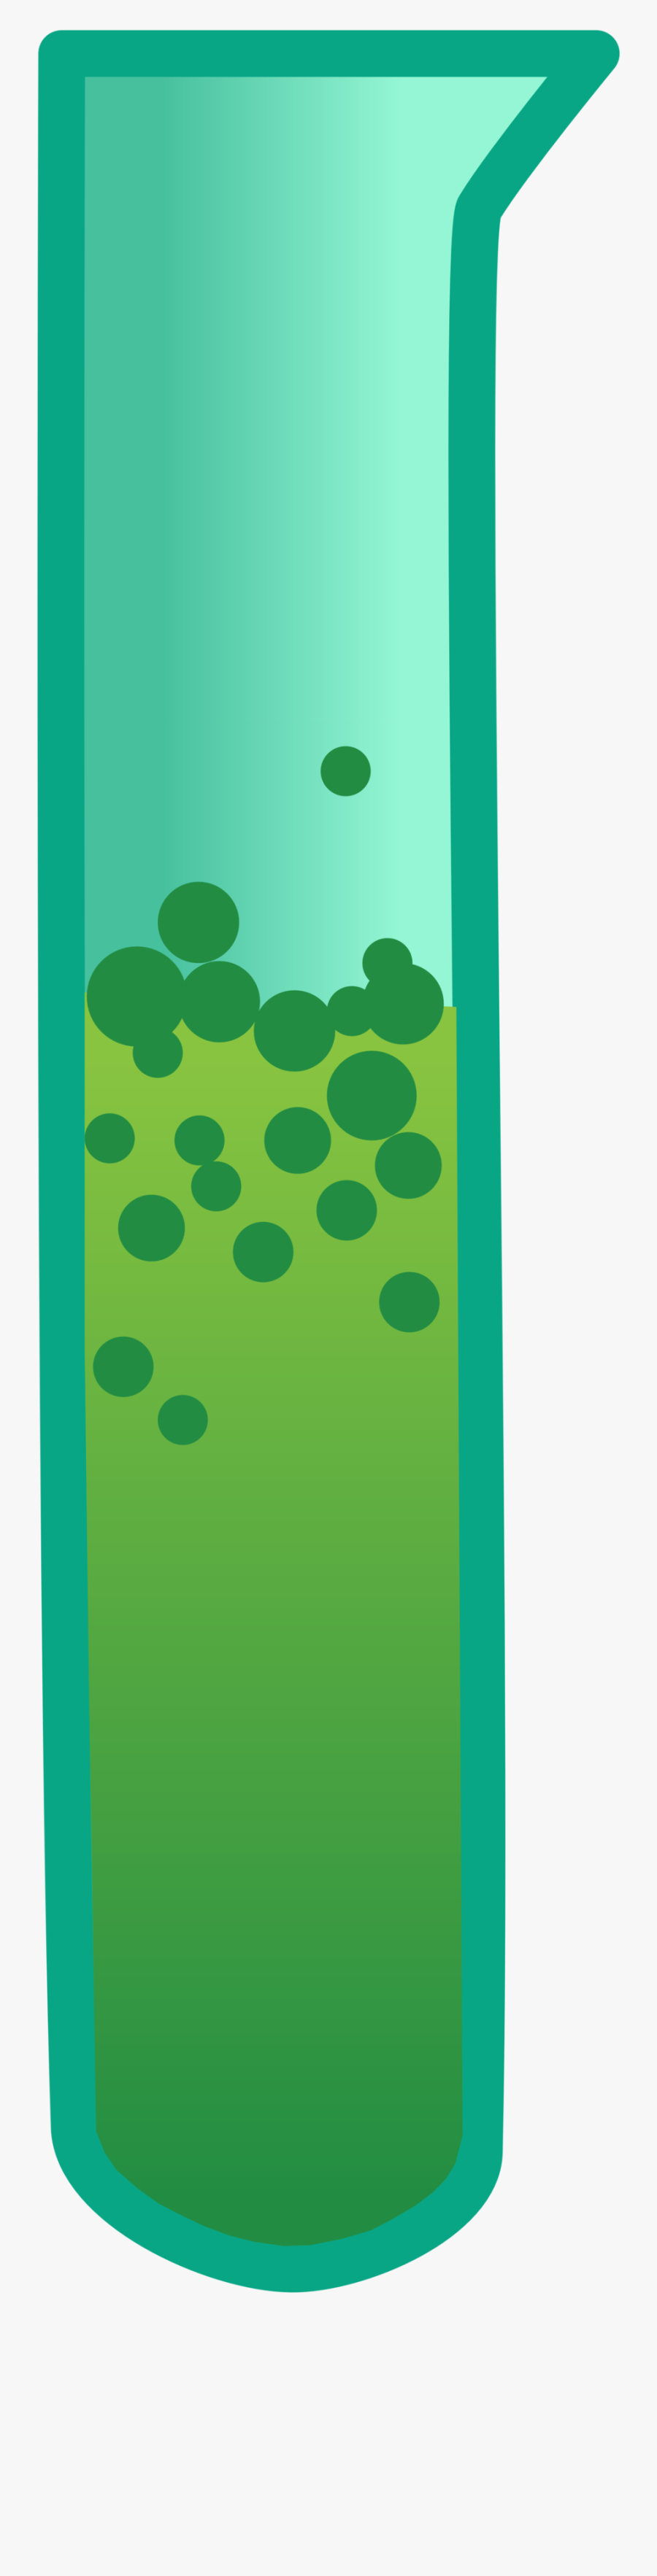 Bubbling Test Tube Animation, Transparent Clipart